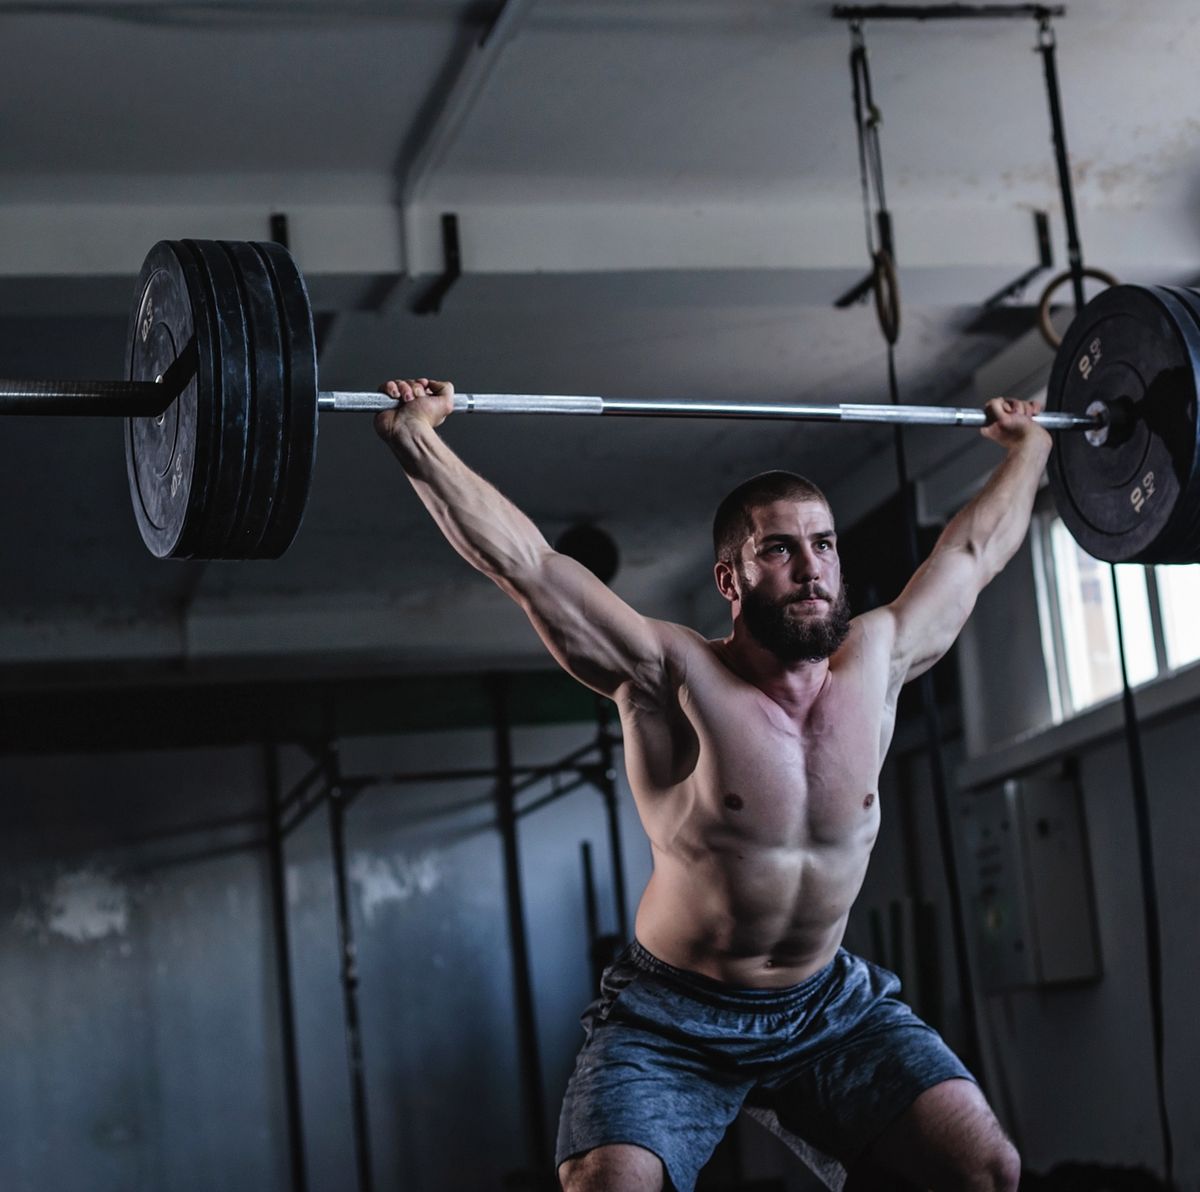 Ace your Snatch Test Training Plan